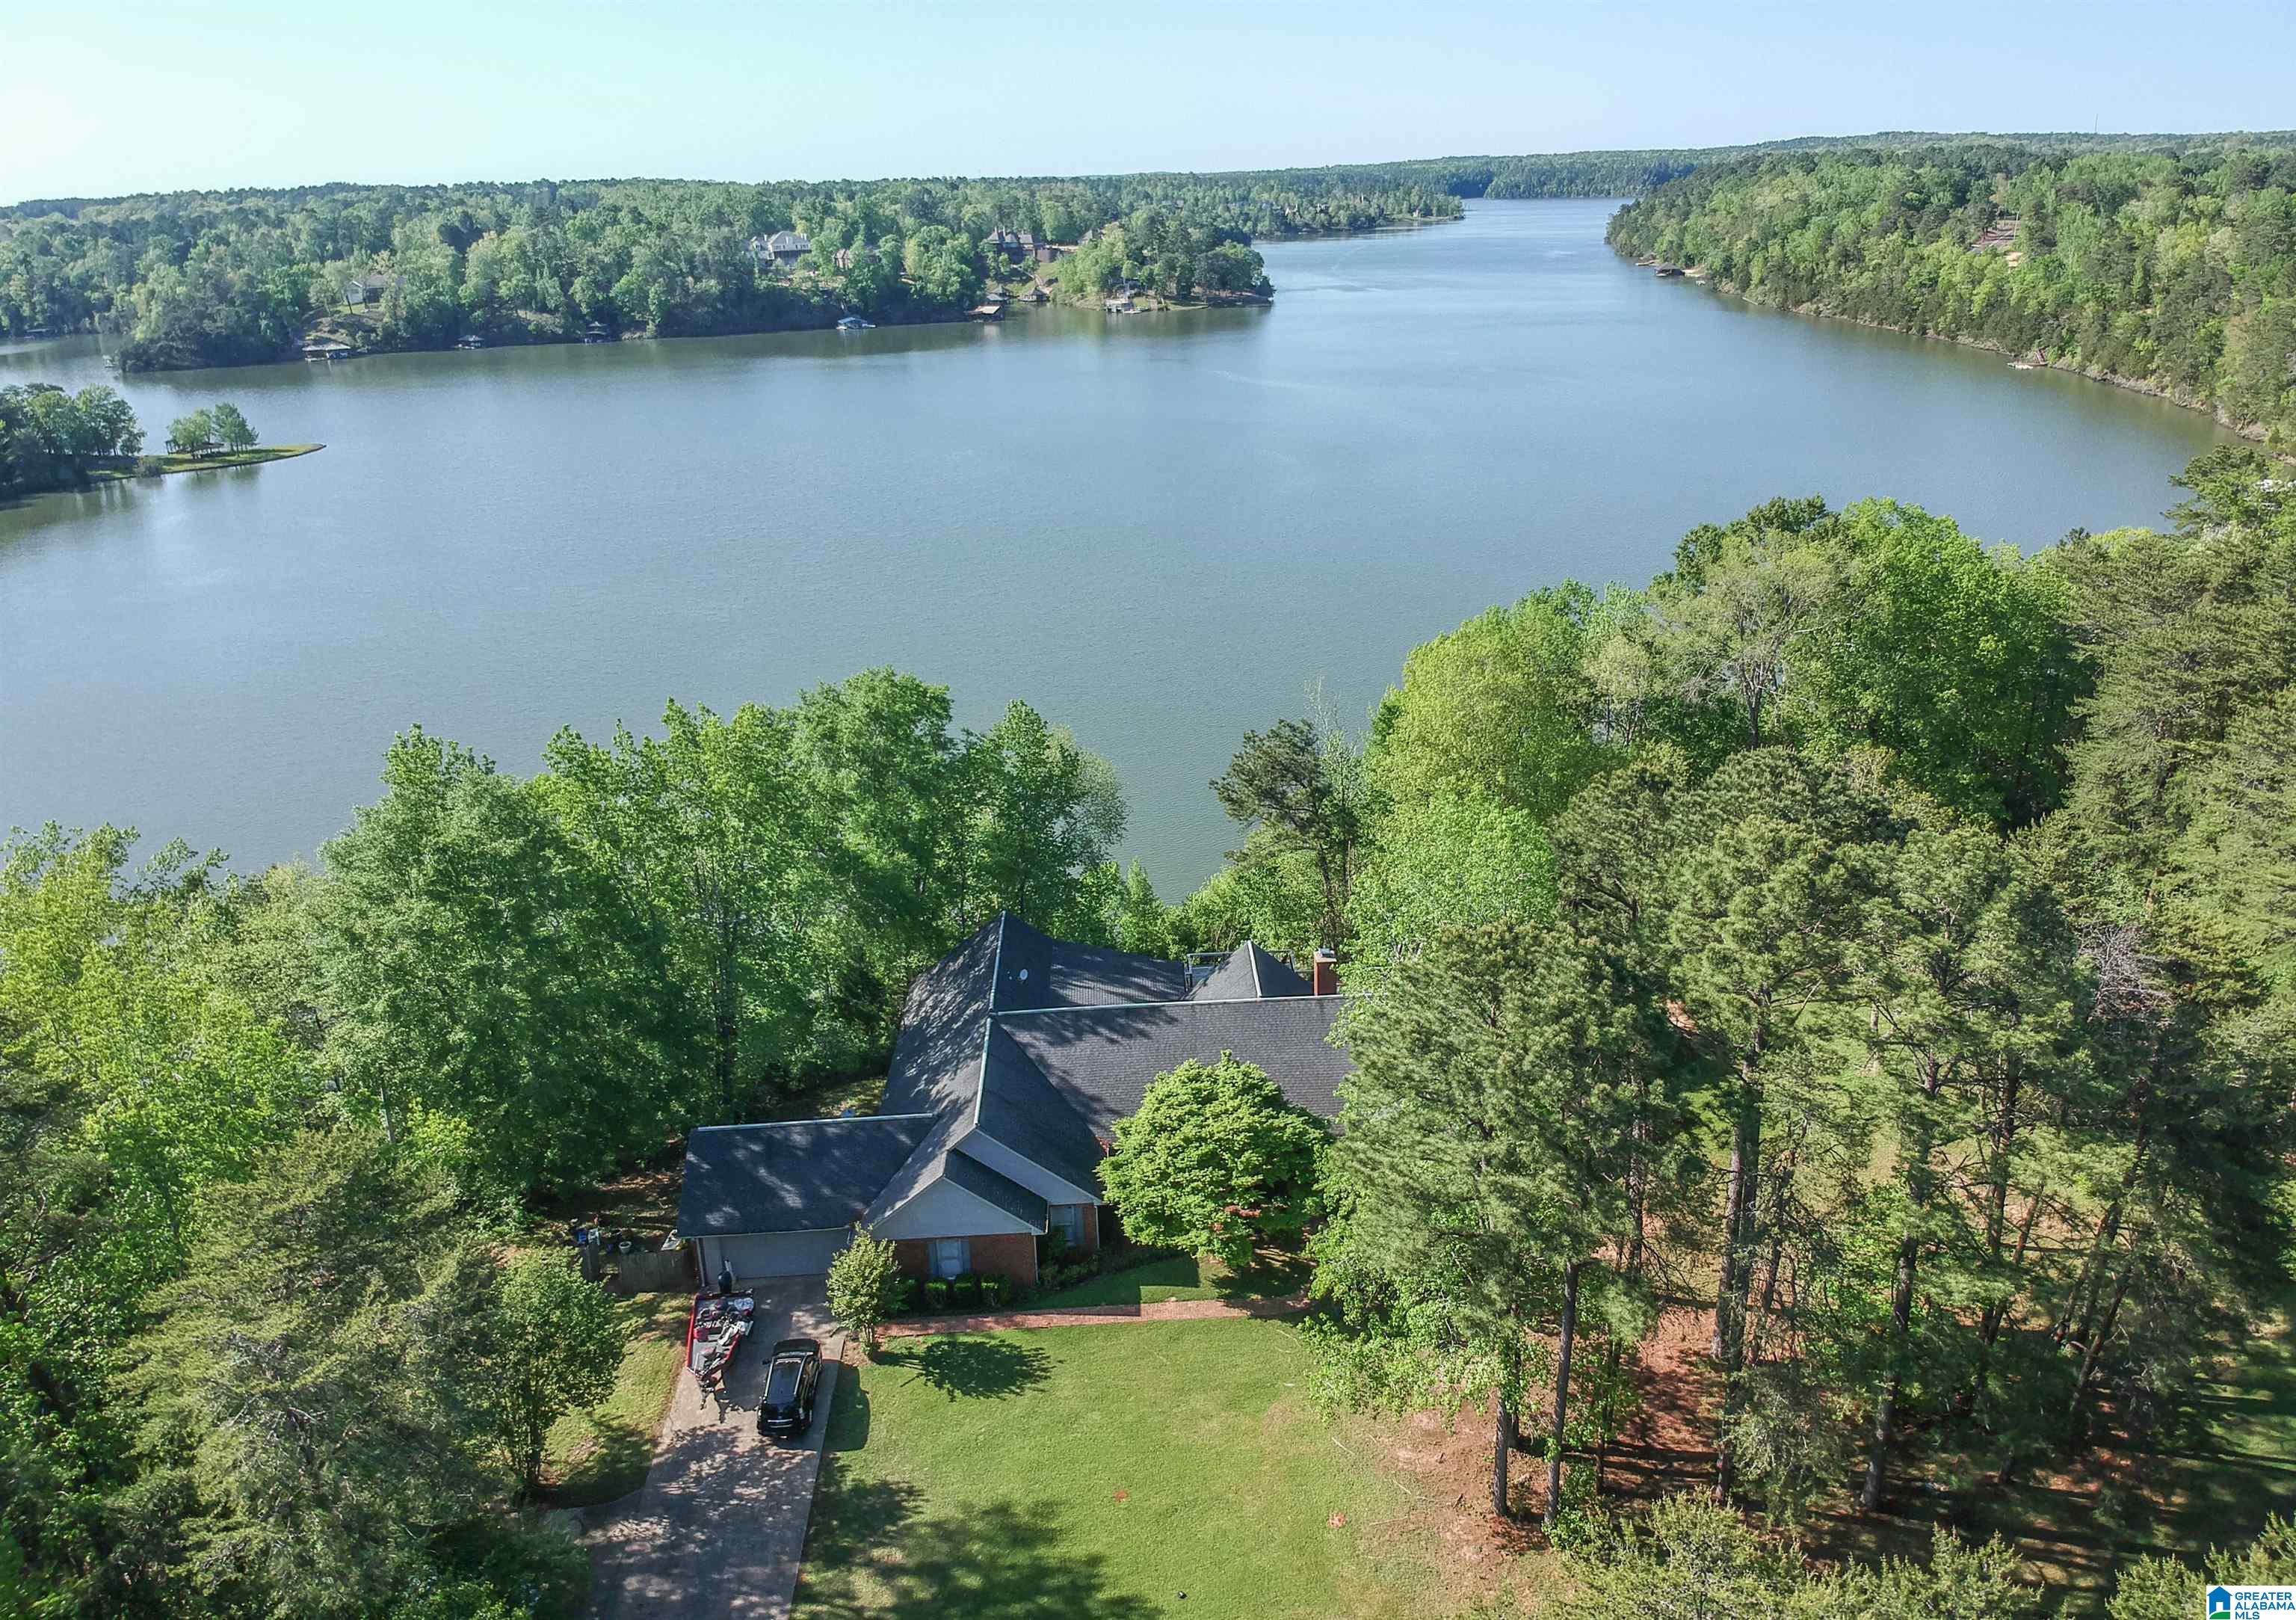 This spacious, split-floor plan home on Lake Tuscaloosa has +/- 463 ft of waterfrontage & views of the water from every angle. With a large deck spanning the back of the house & stairs for a short walk down to the dock, this home is made for lake living. Entertain in the formal living & dining rooms, or gather in the huge family room with new windows & a raised hearth fireplace from floor to ceiling. Enjoy the kitchen with a walk-in pantry, granite countertops, & eat-in island. Relax in the master bedroom with deck access & more beautiful views of the lake. This home has lots of built-in storage, the largest laundry room you'll ever see, & a den with a bonus bedroom. It sits on a beautifully landscaped lot of 1.87 acres on a dead-end street. Call Carrie today to schedule a tour.